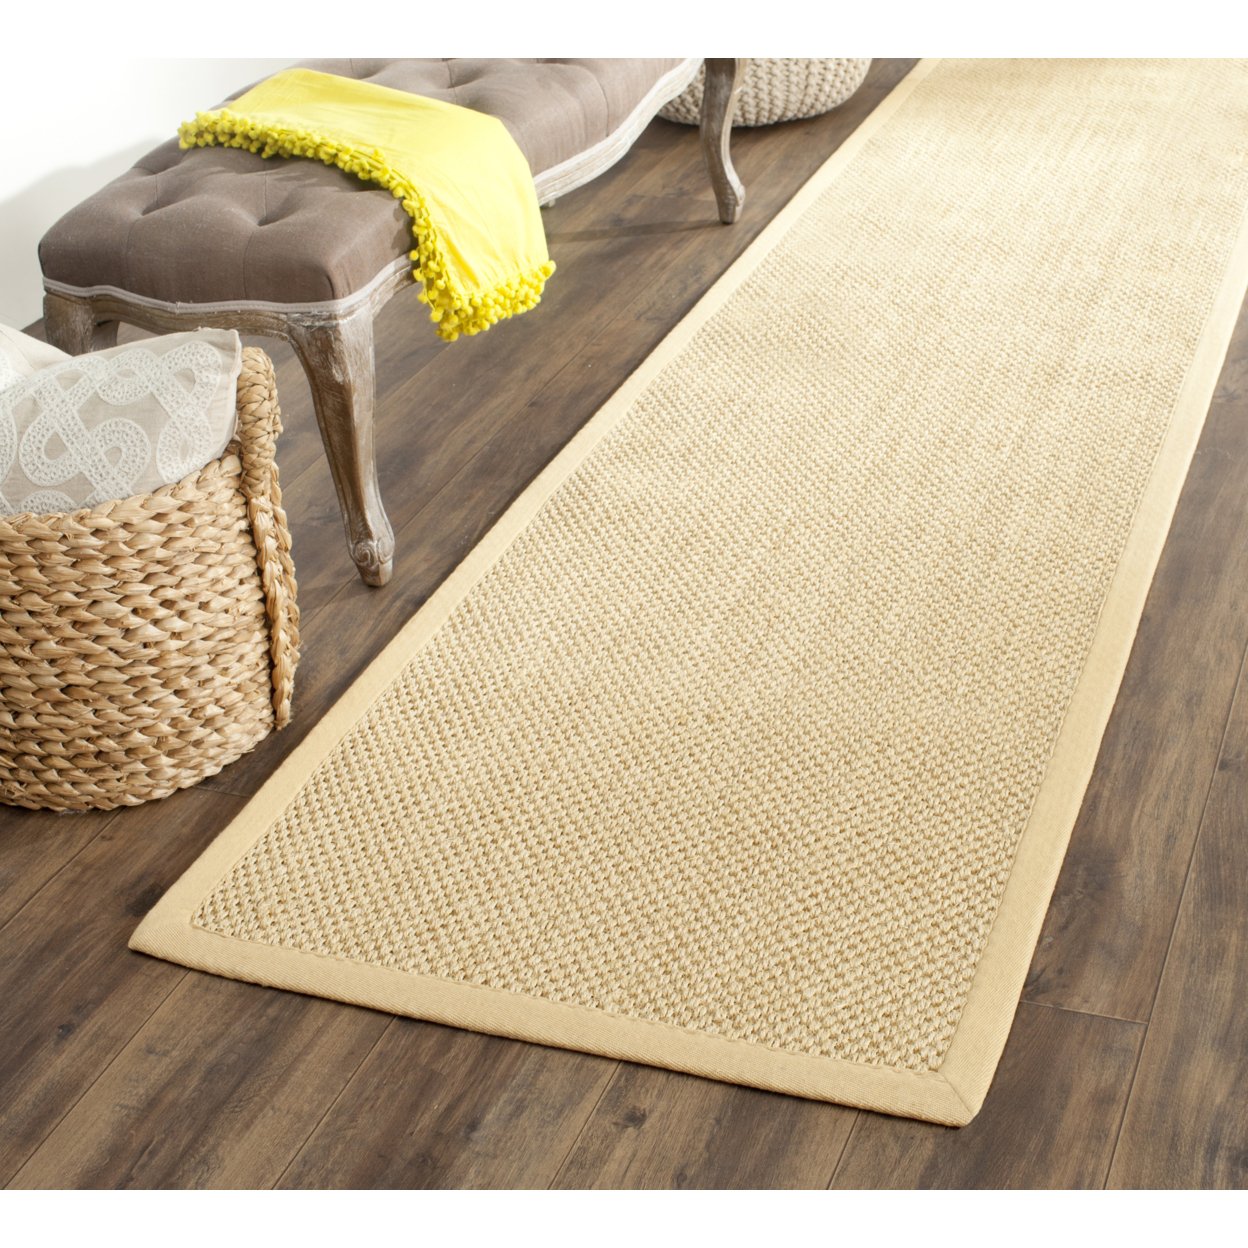 SAFAVIEH Natural Fiber Collection NF443A Maize/Wheat Rug - 2' 6 X 20'